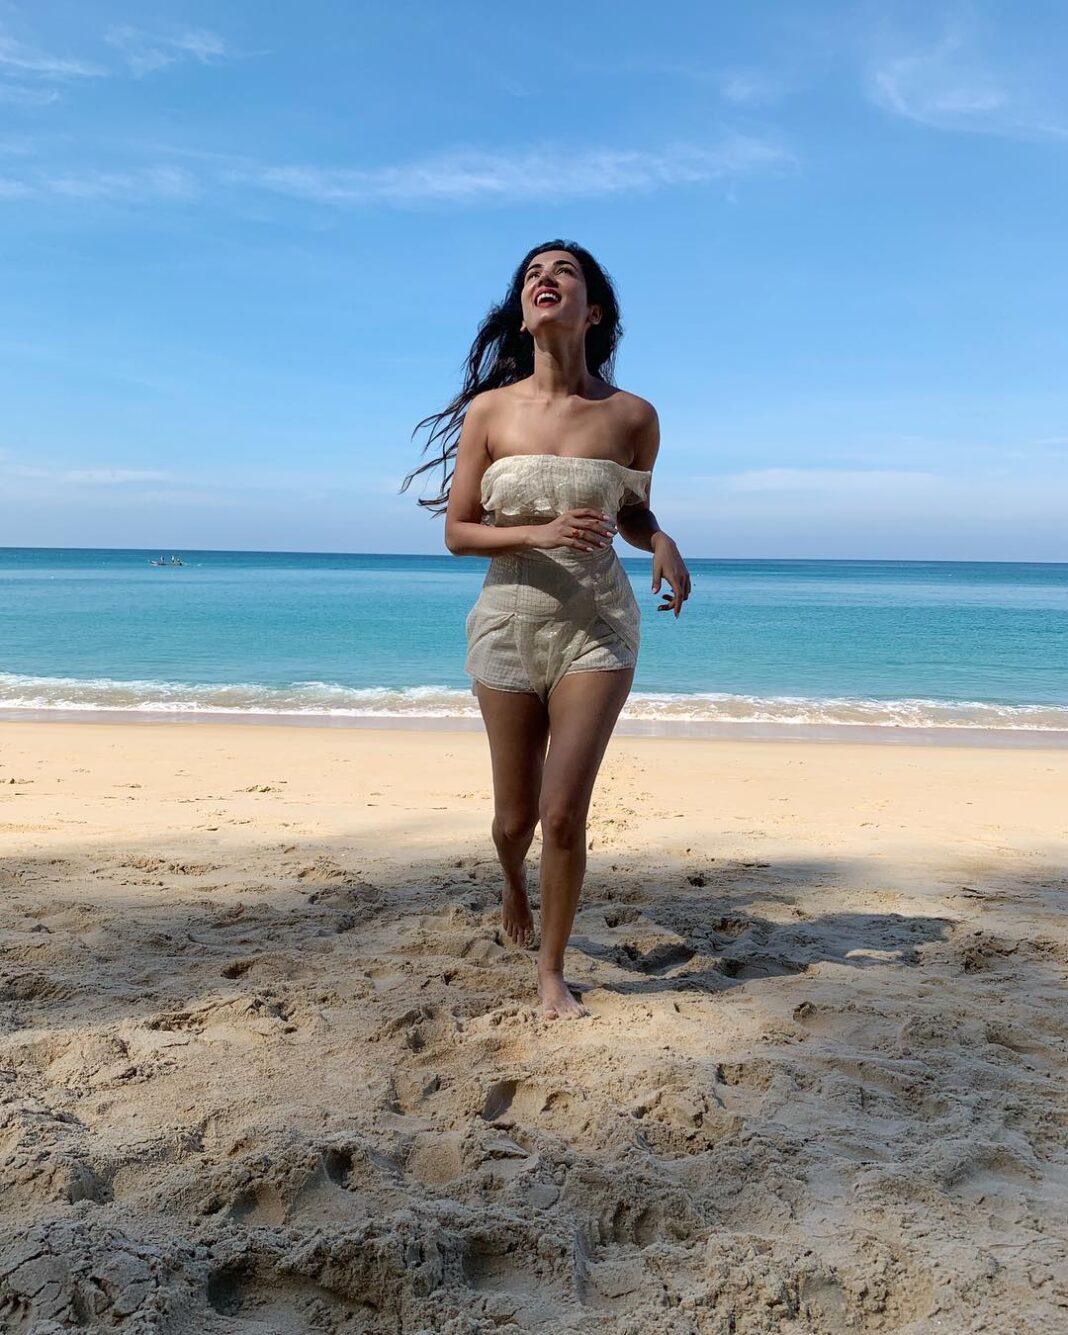 Sonal Chauhan Instagram - Lookin’ up and Laughin’ my way in to the new year 2019. 💫🦋💫🦋 New year!! 🌸New beginnings!!🌸 #beach #sun #sand #happnewyear #2019 #happiness #tan #bluewaters #salt #golden